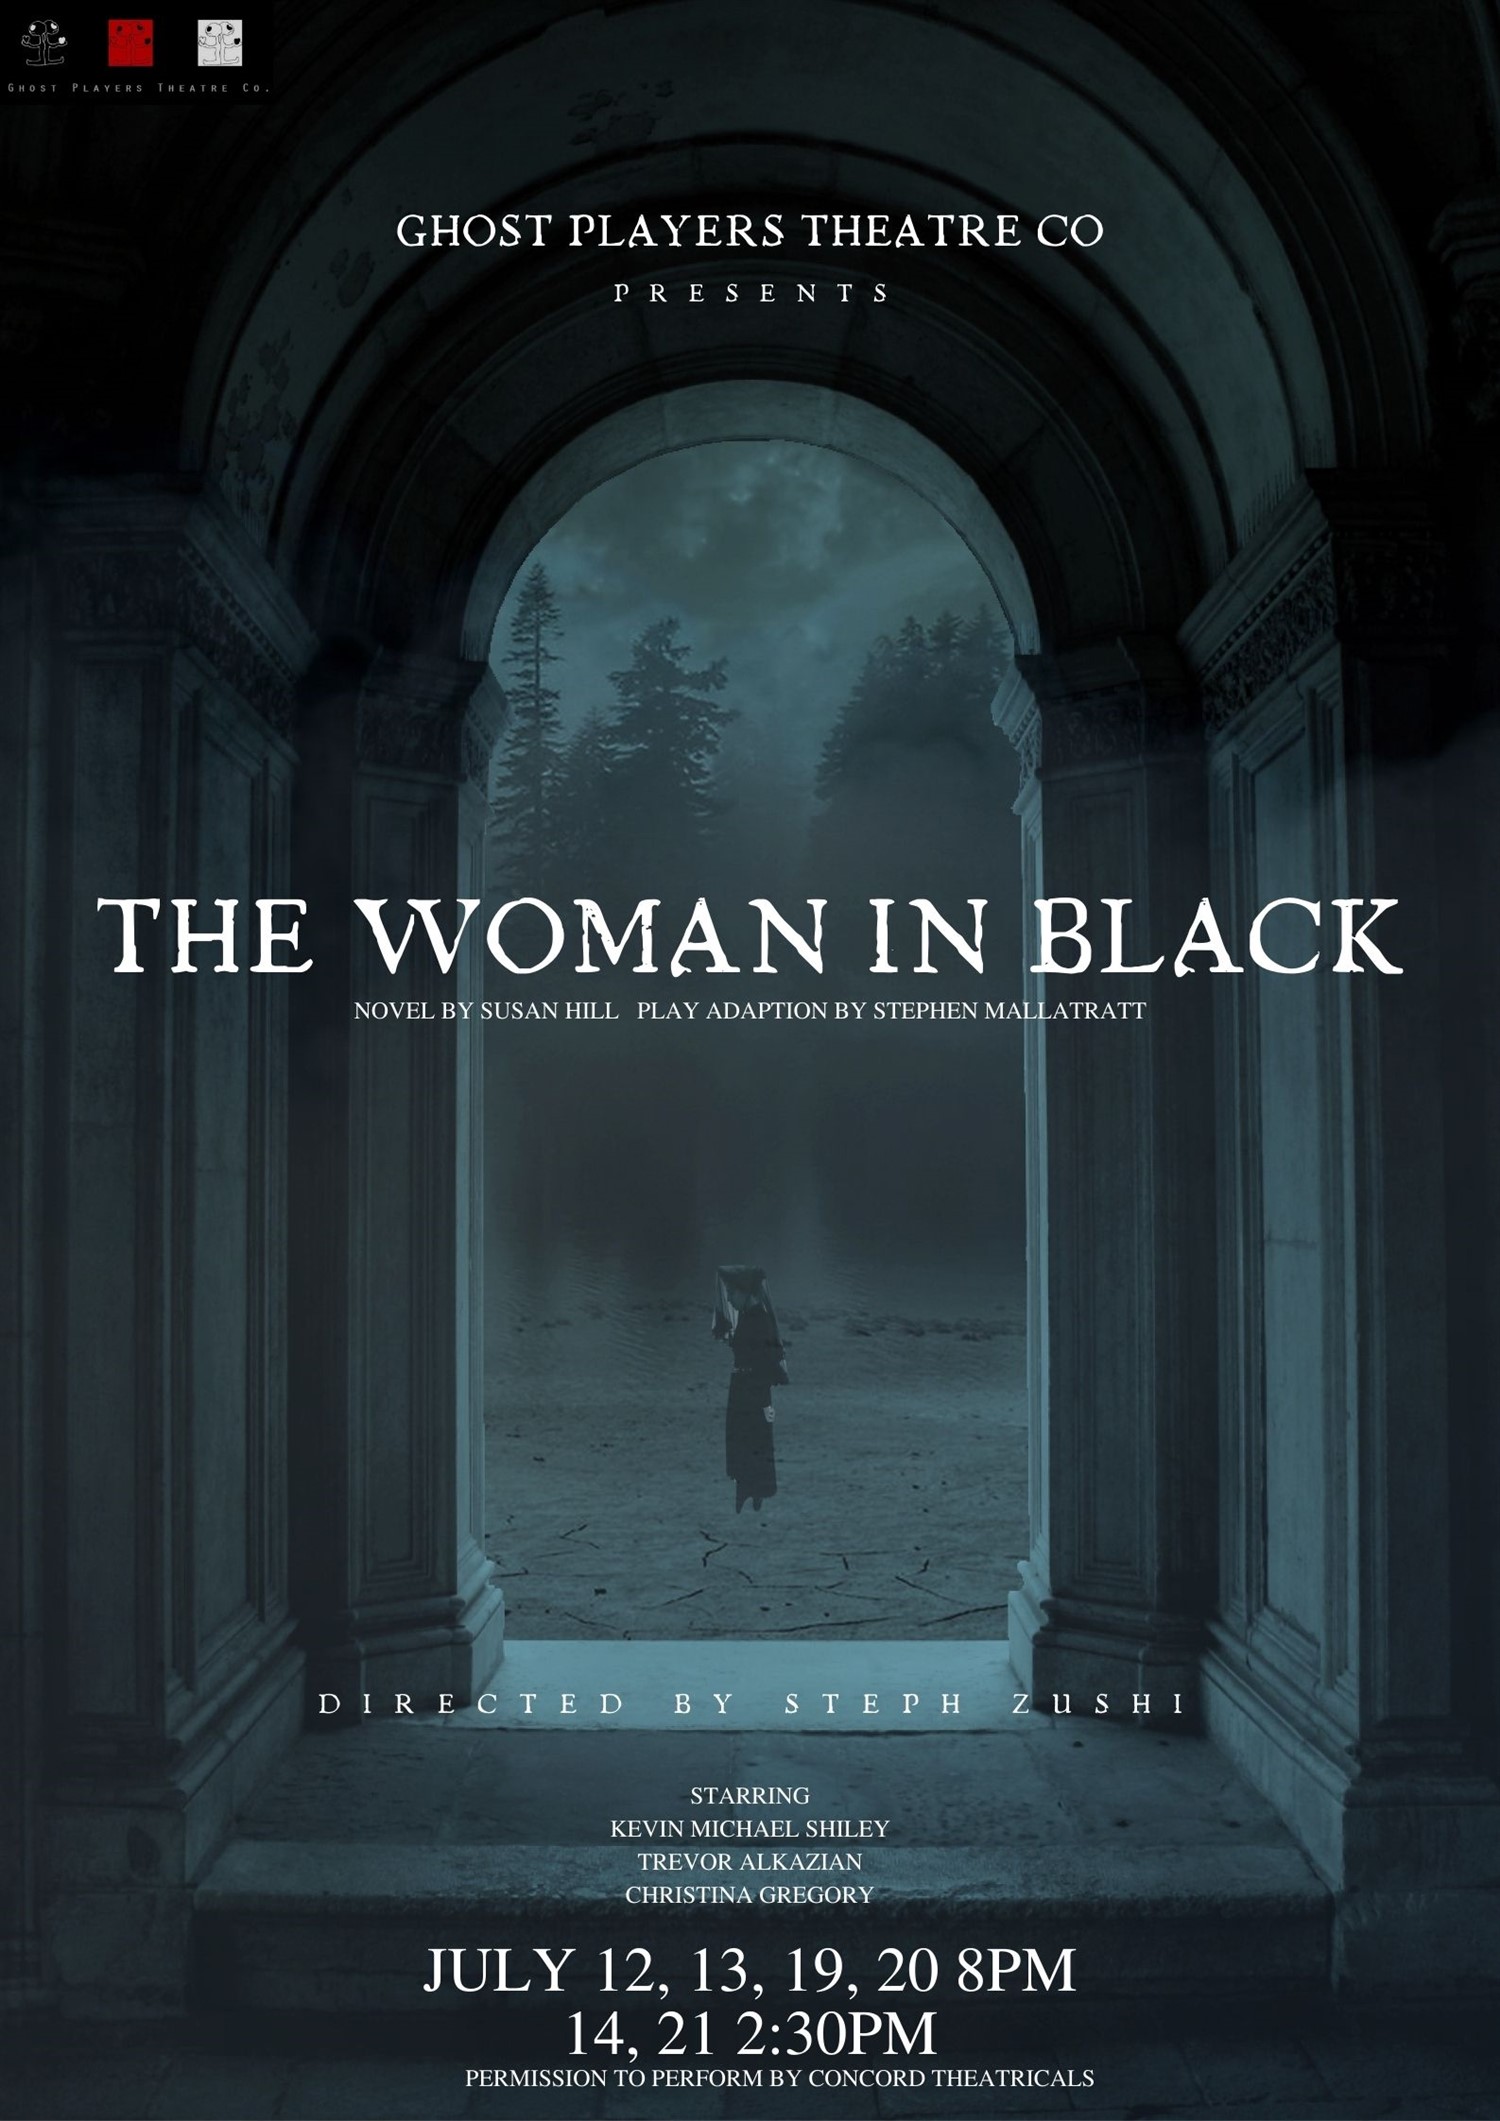 THE WOMAN IN BLACK Presented by Ghost Players Theatre Co. on Jul 23, 00:00@Alemany Theater - Buy tickets and Get information on GHOST PLAYERS THEATRE CO 